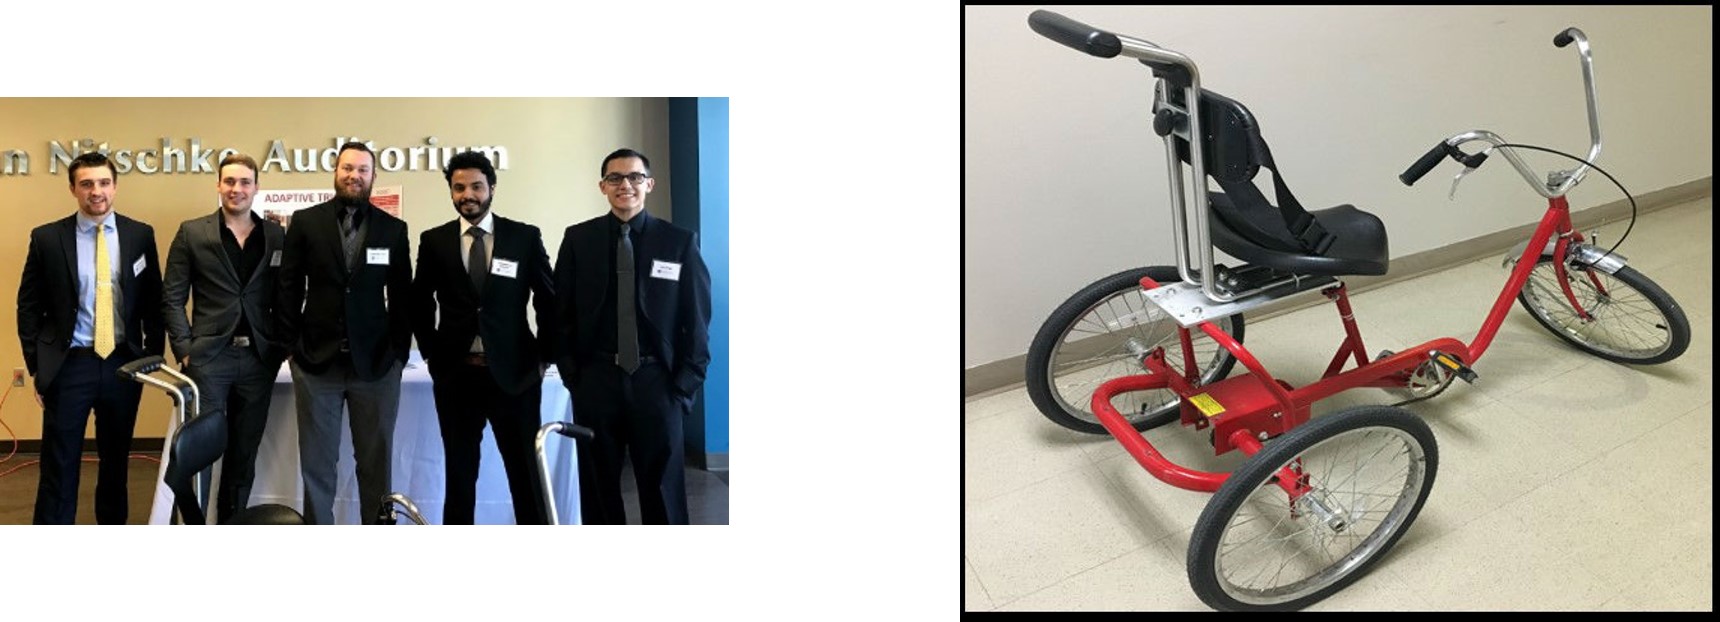 Senior Design team members with protype of Assistive Tricycle